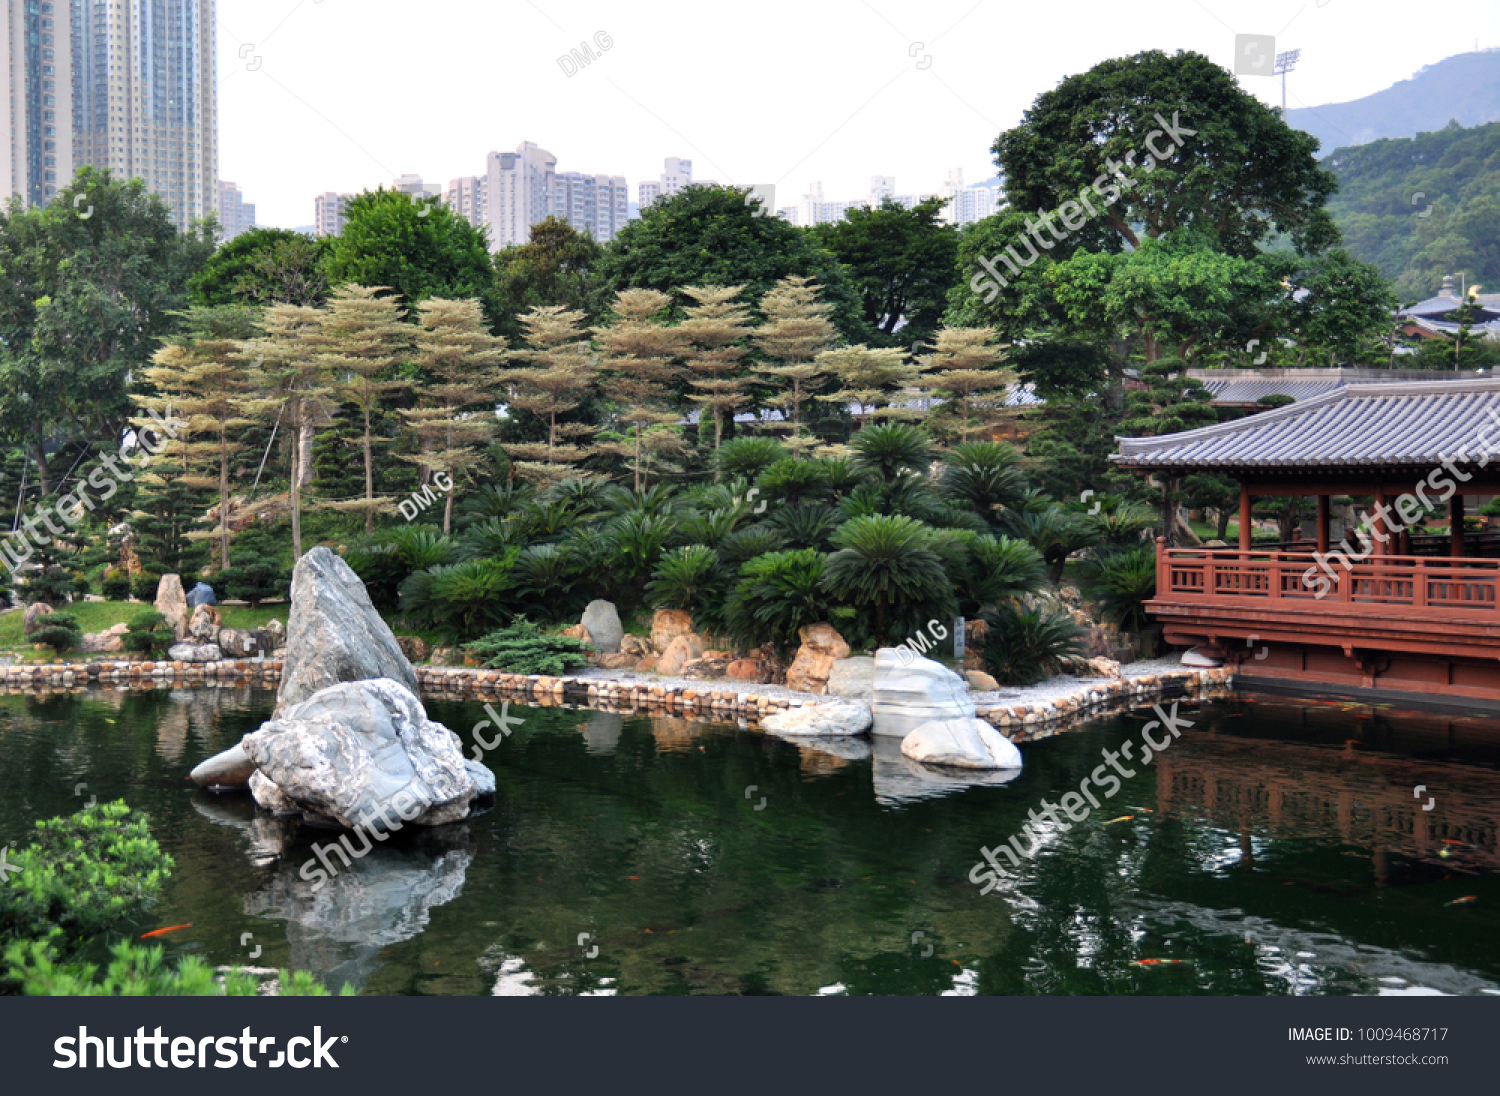 Lake and large stones in the botanical garden of Hong Kong #1009468717